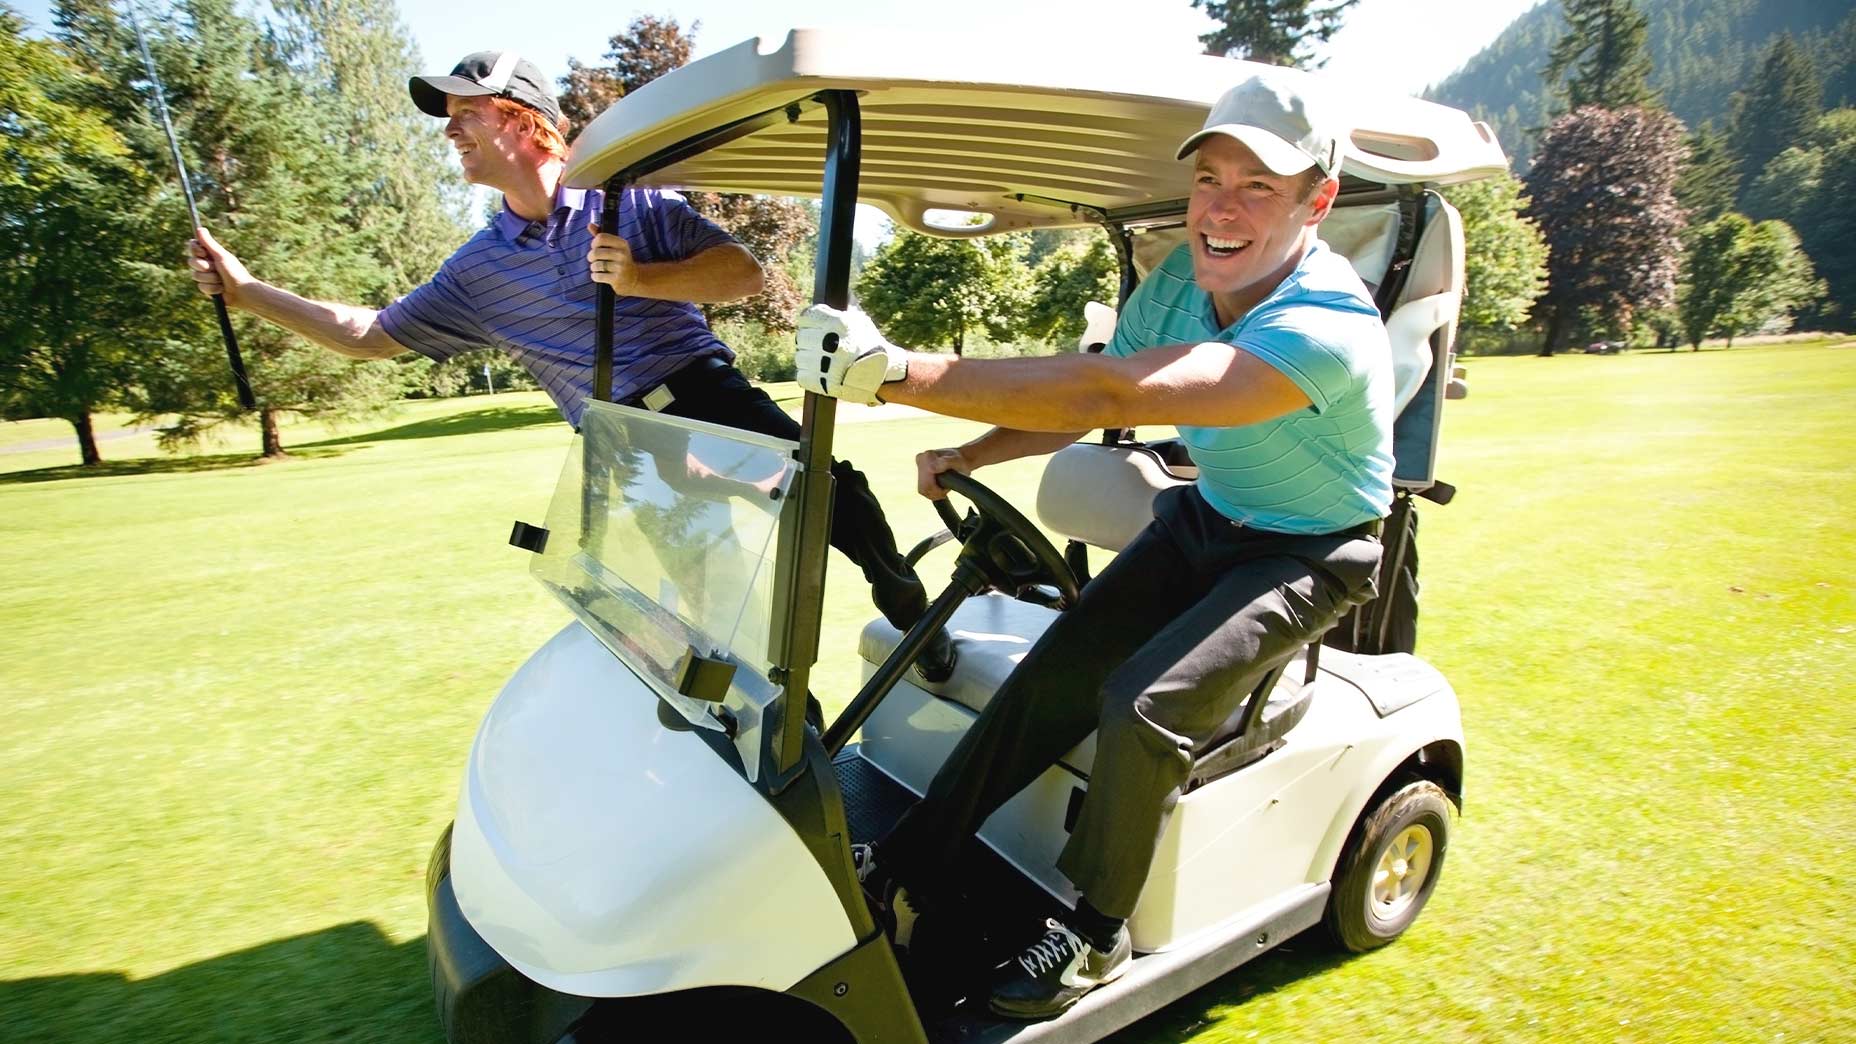 3 accessories to enhance your experience on the golf course